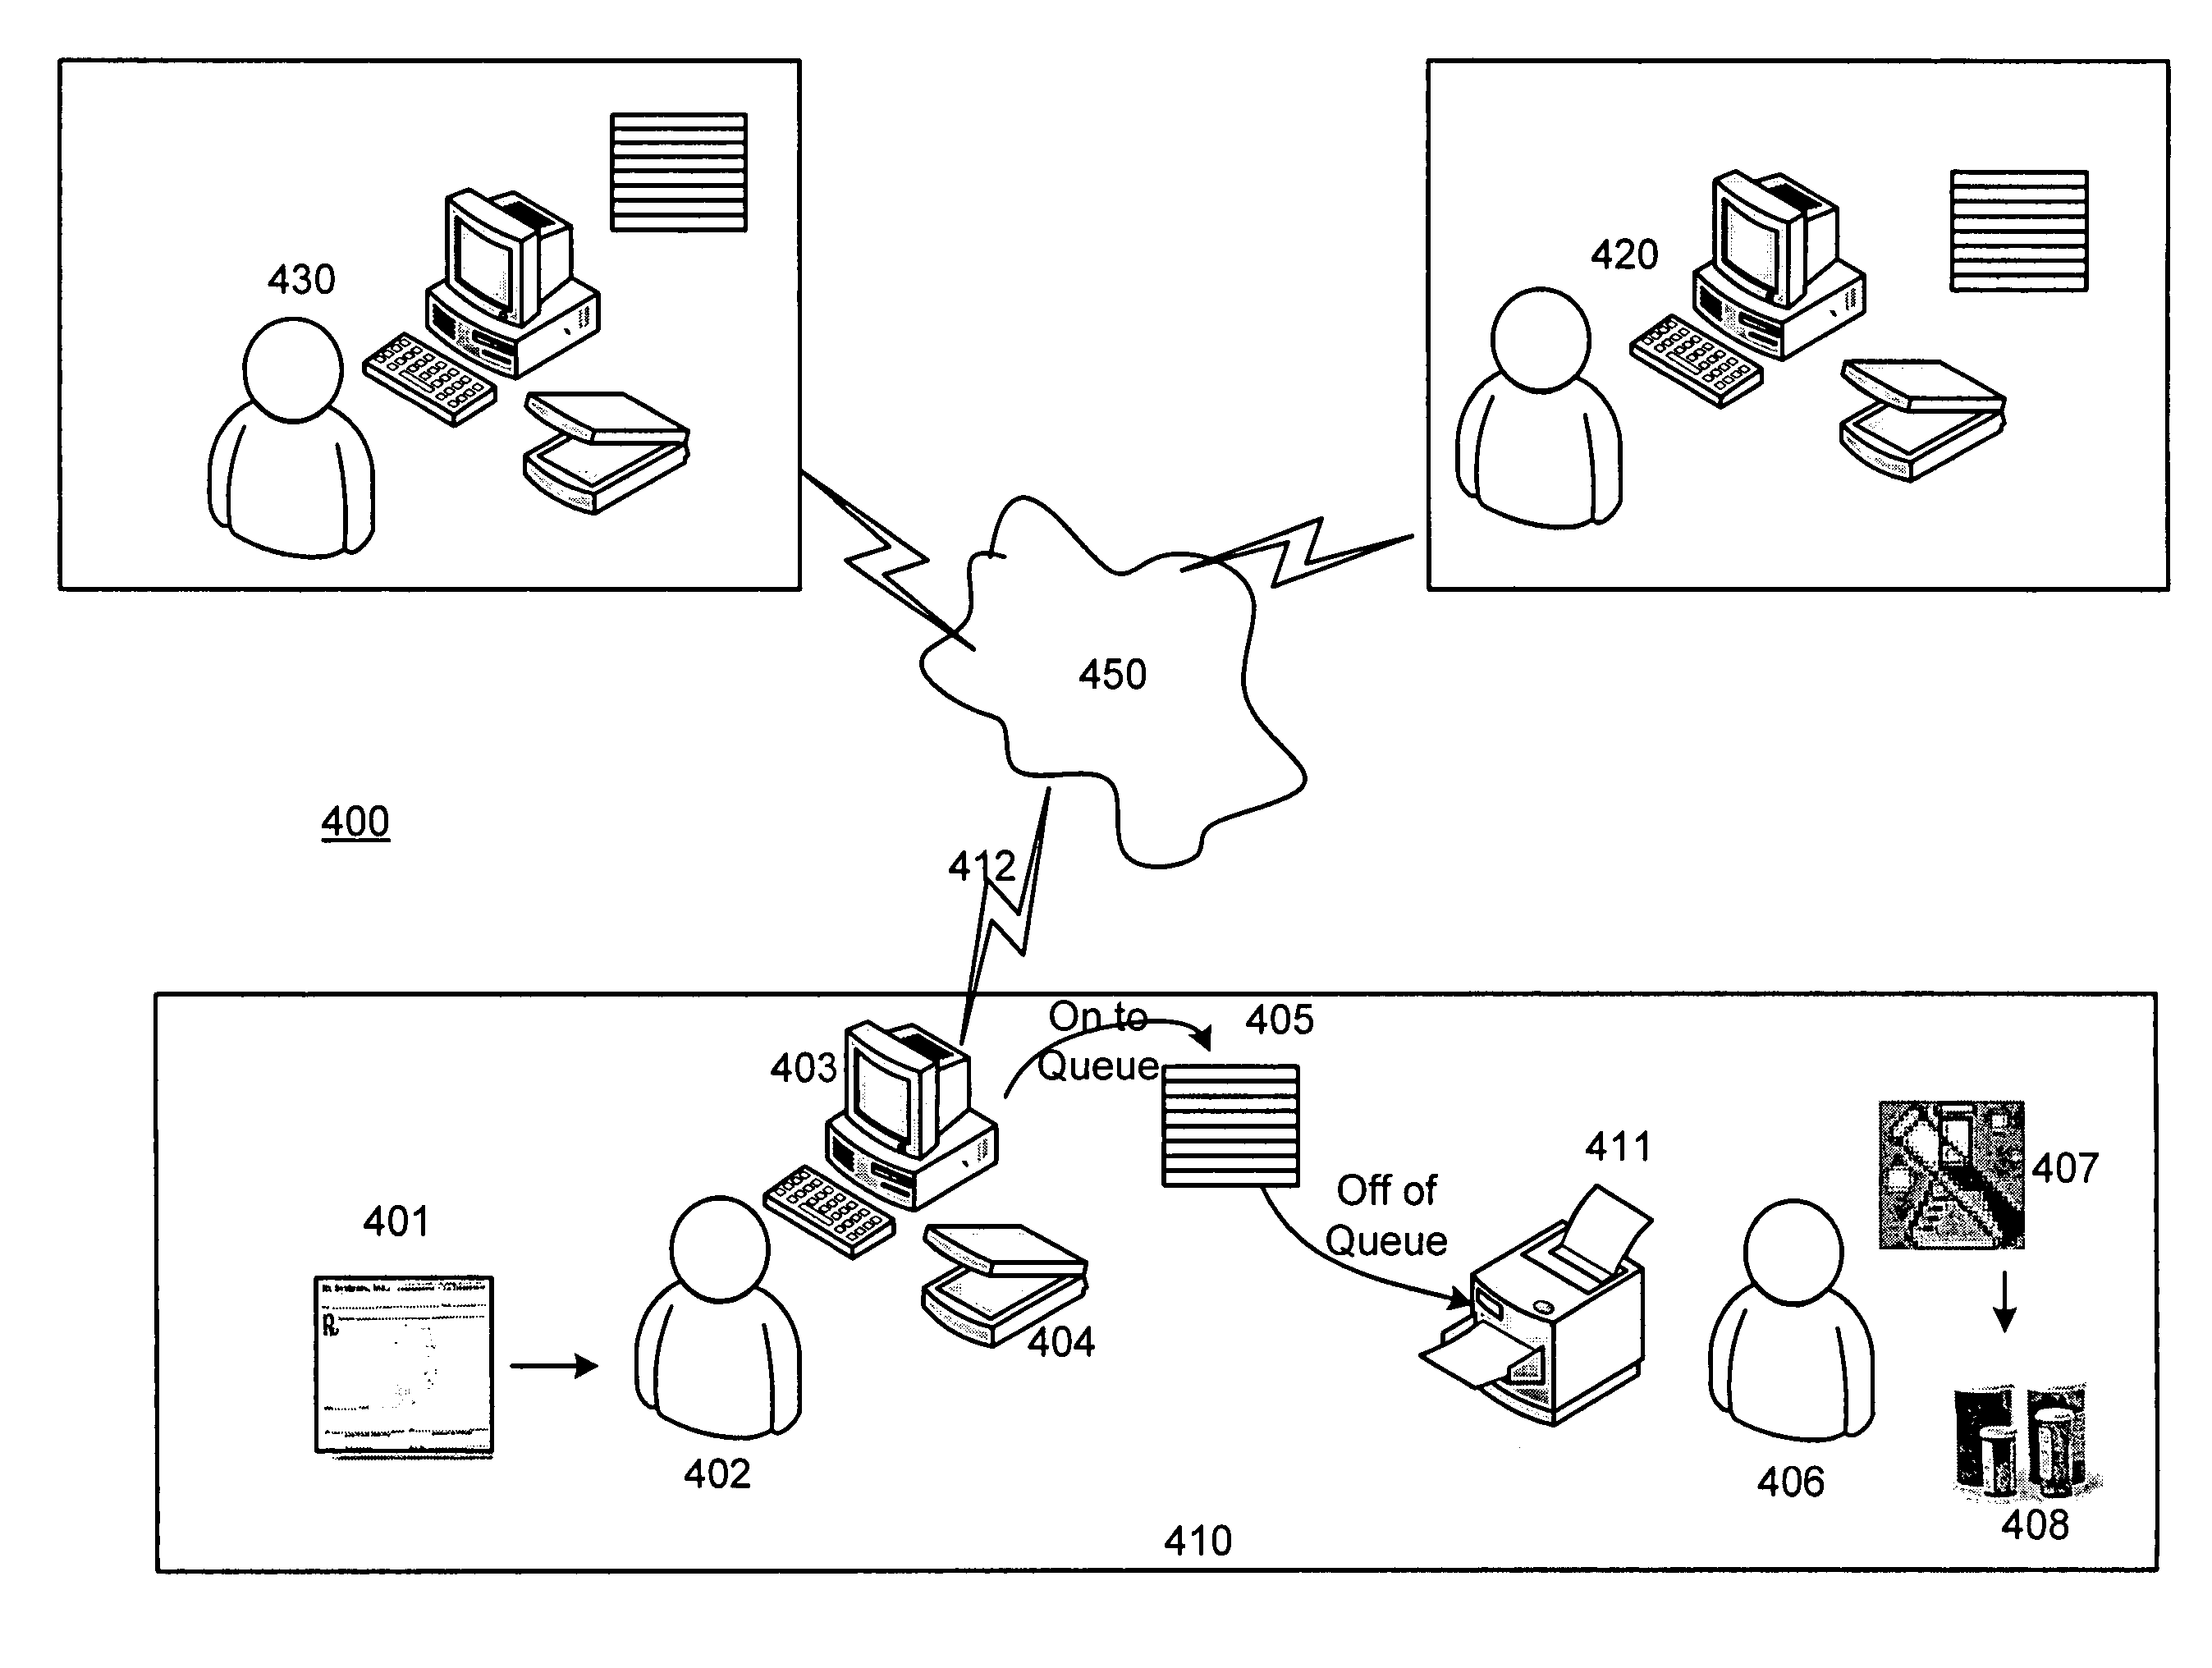 Method and apparatus for inter-pharmacy workload balancing using resource function assignments